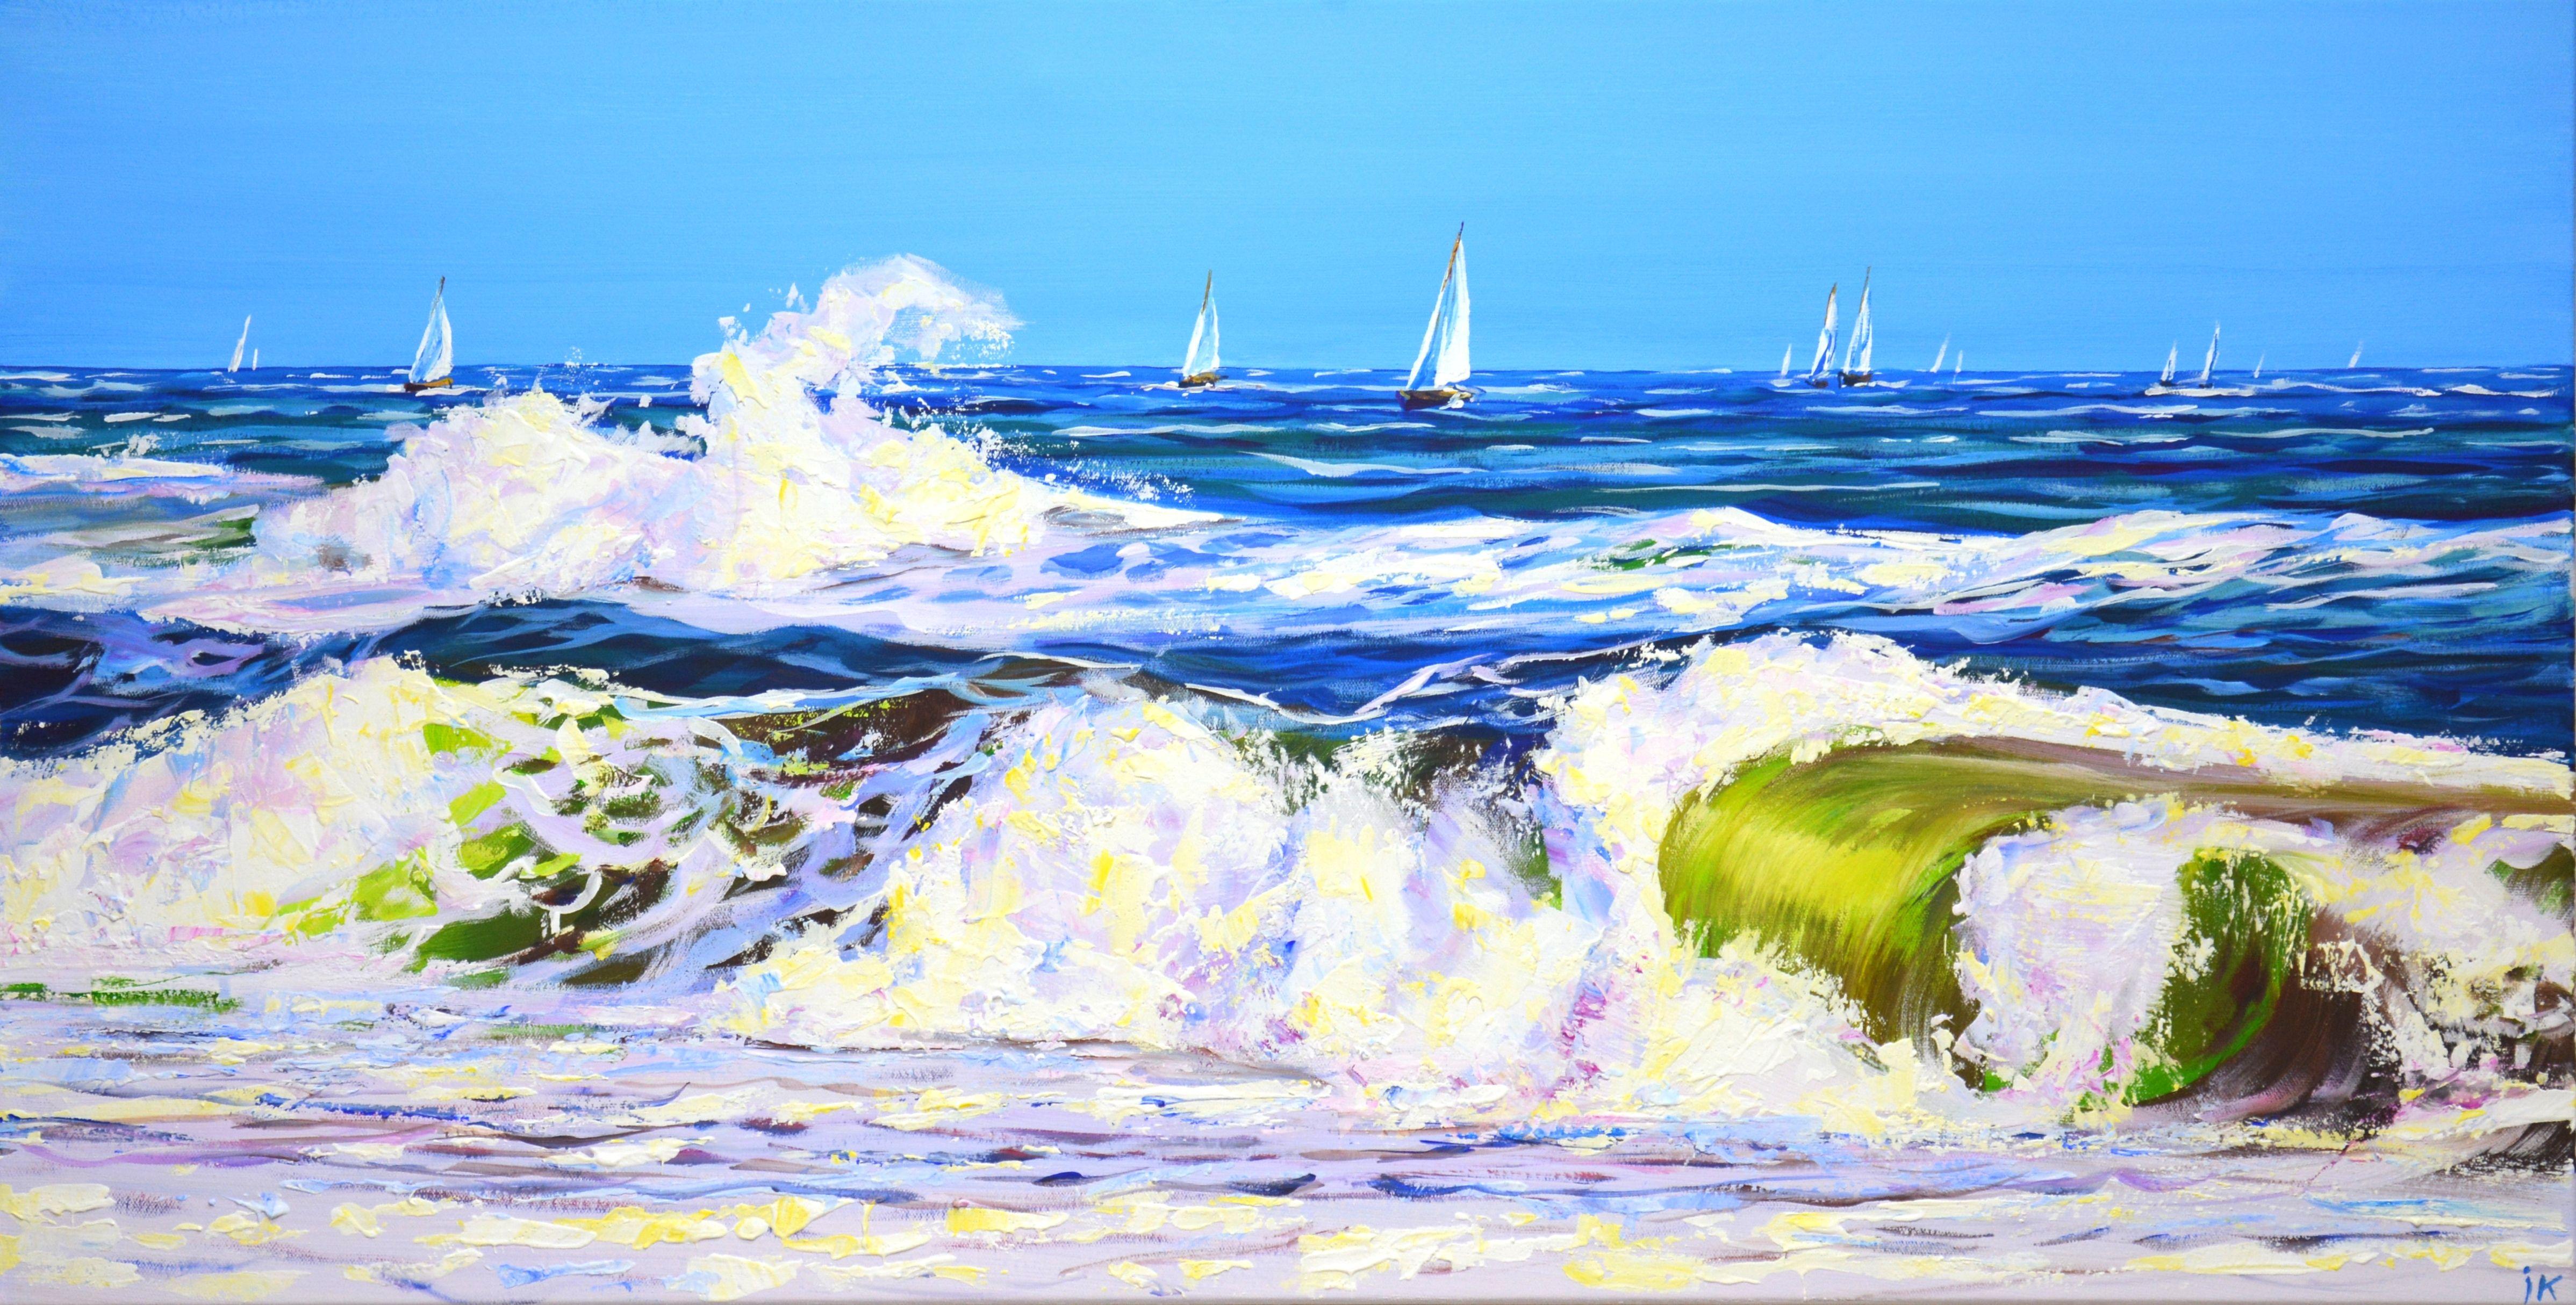 Ocean. Regatta. The work is written with inspiration, positively. Nature: seascape, clear sky over the ocean, light reflected by oncoming waves, sun glare on the water, sea foam, sailboats on the water create an atmosphere of relaxation. A rich